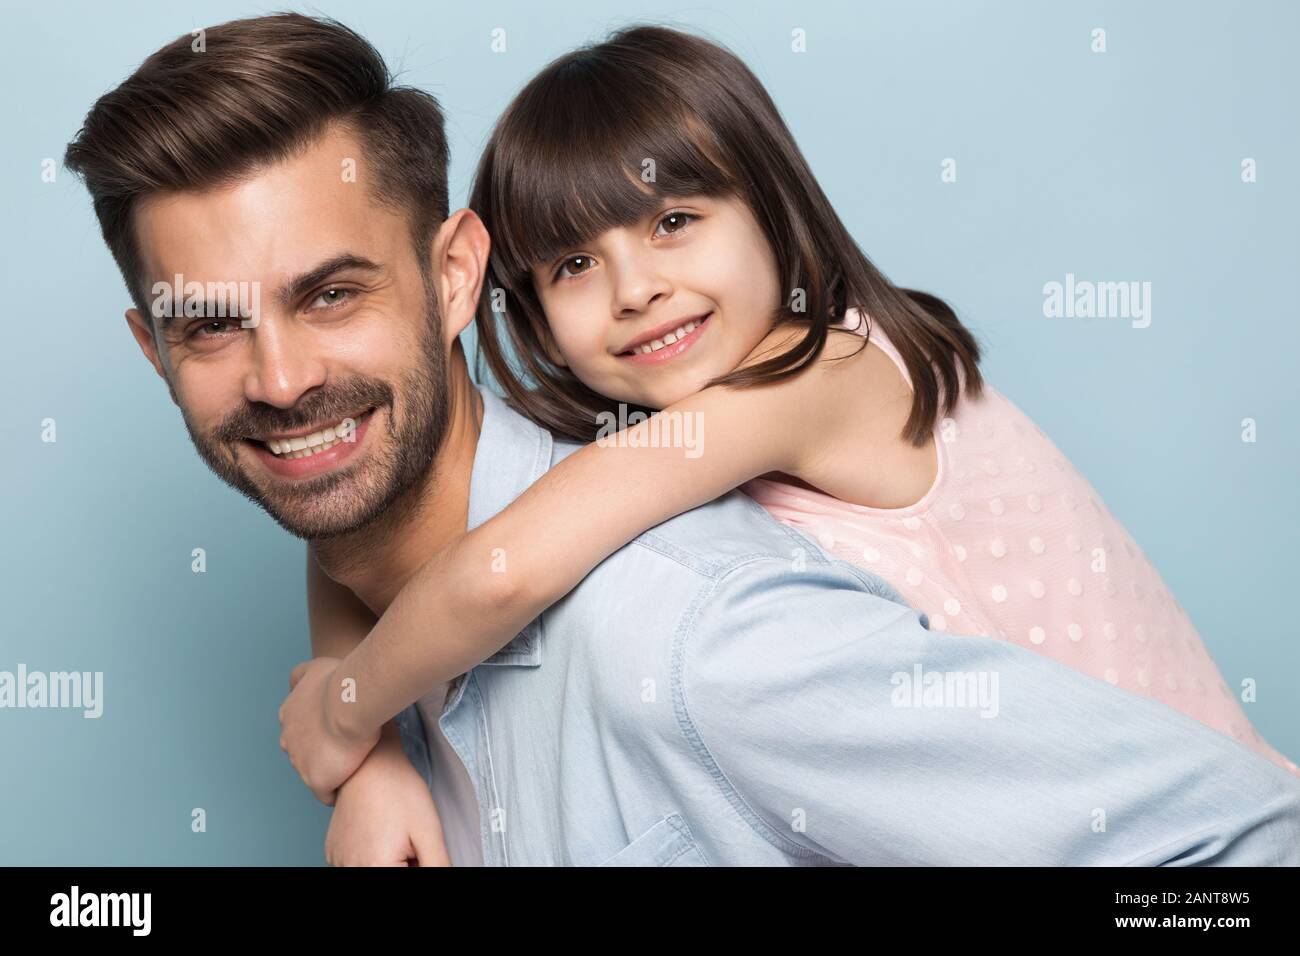 Happy young dad holding little preschool smiling daughter on back. Stock Photo